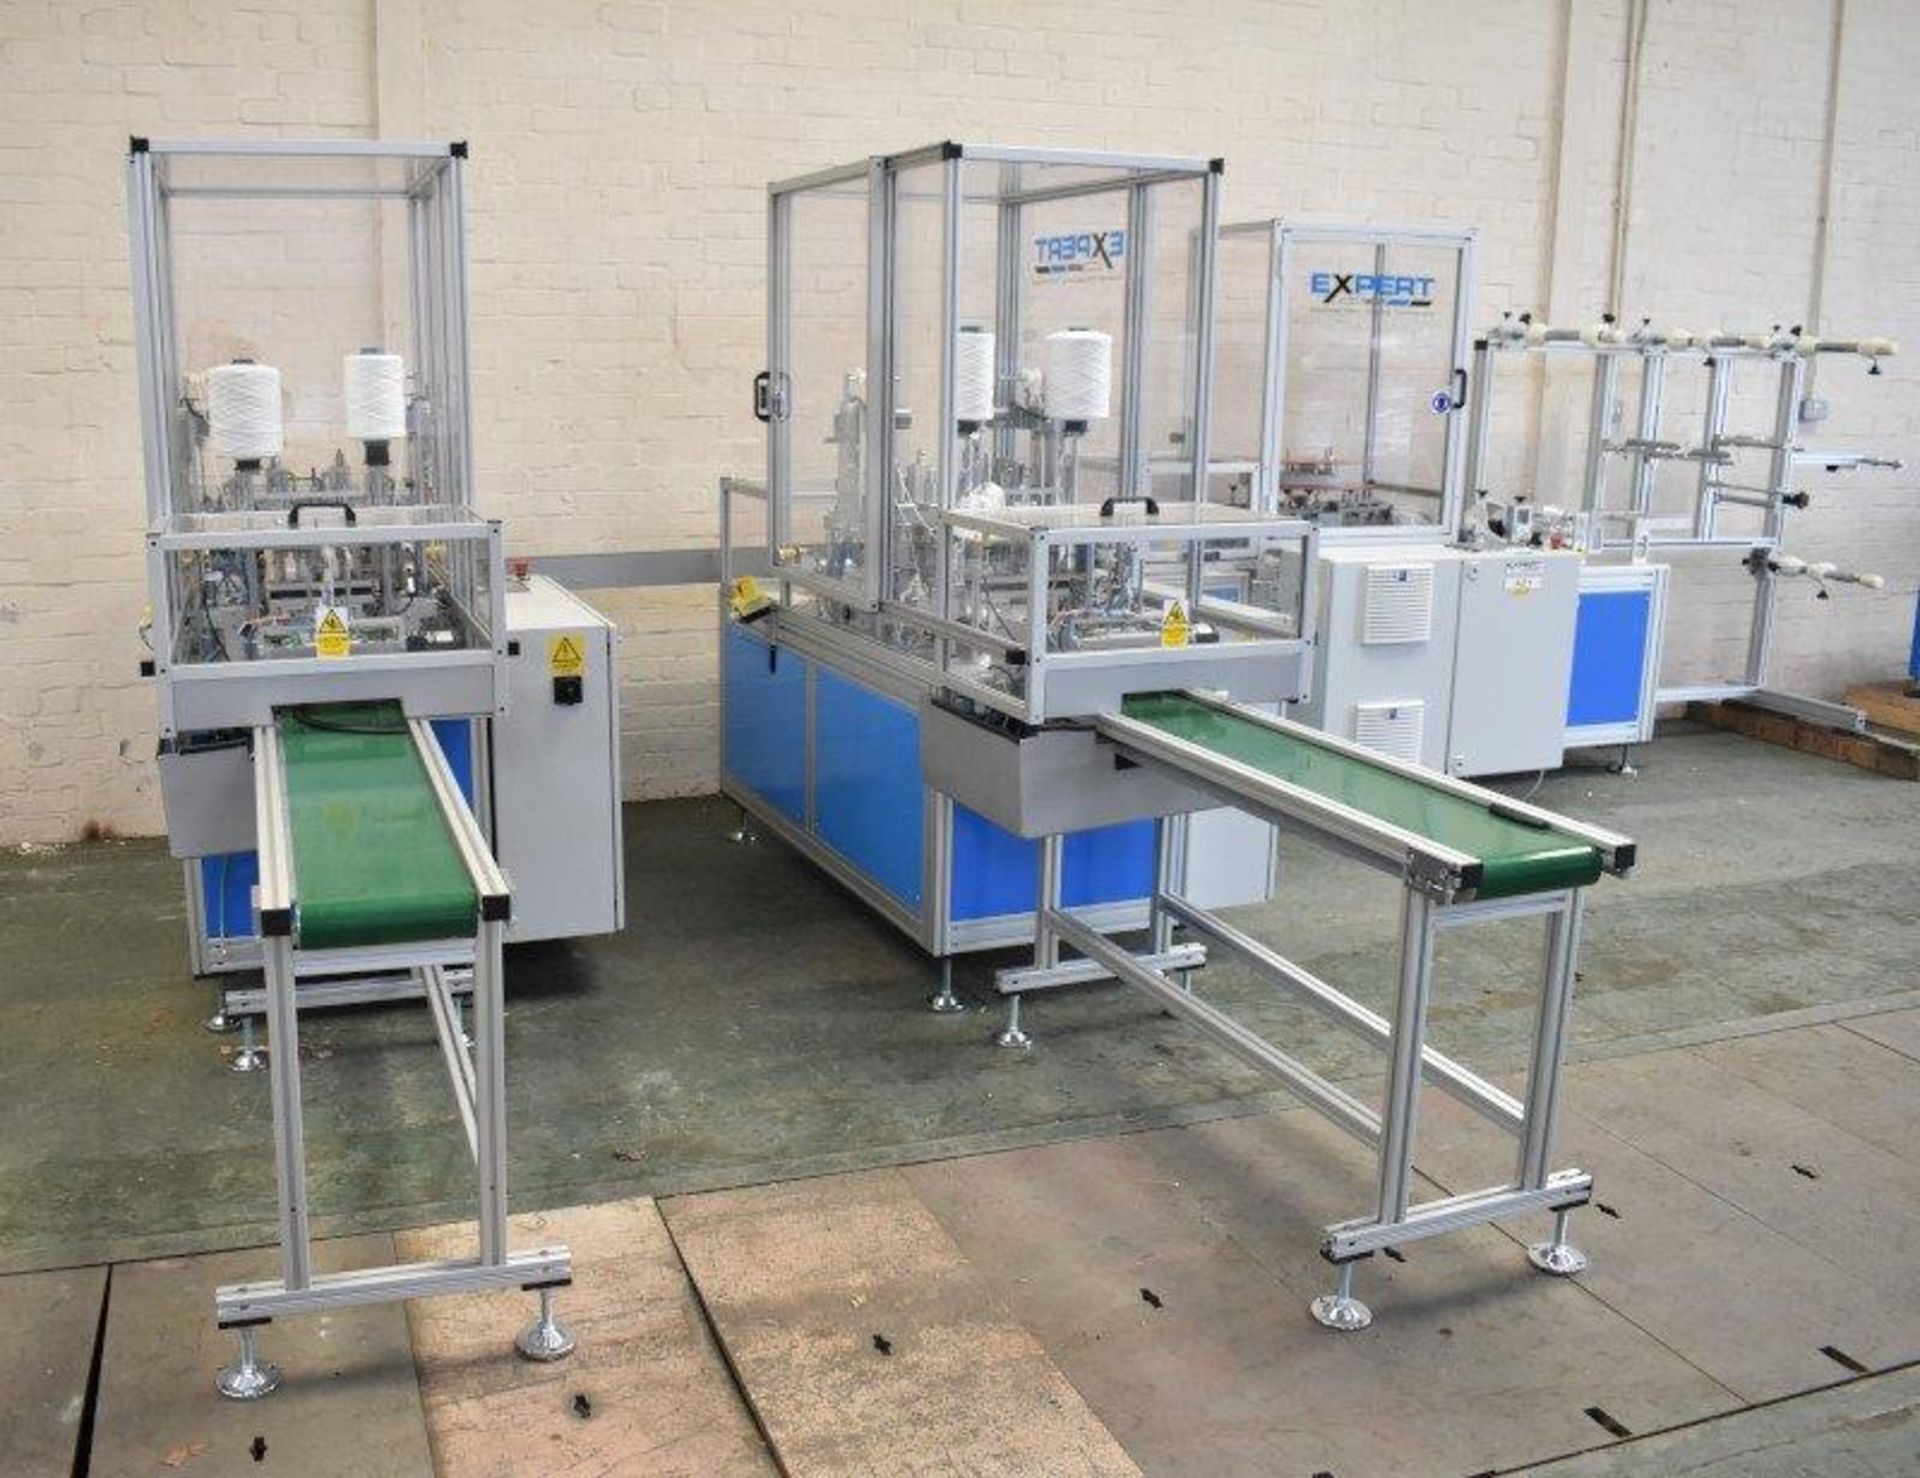 Expert fully automated Mask Making Machine - manufactured in 2020 - Image 15 of 20